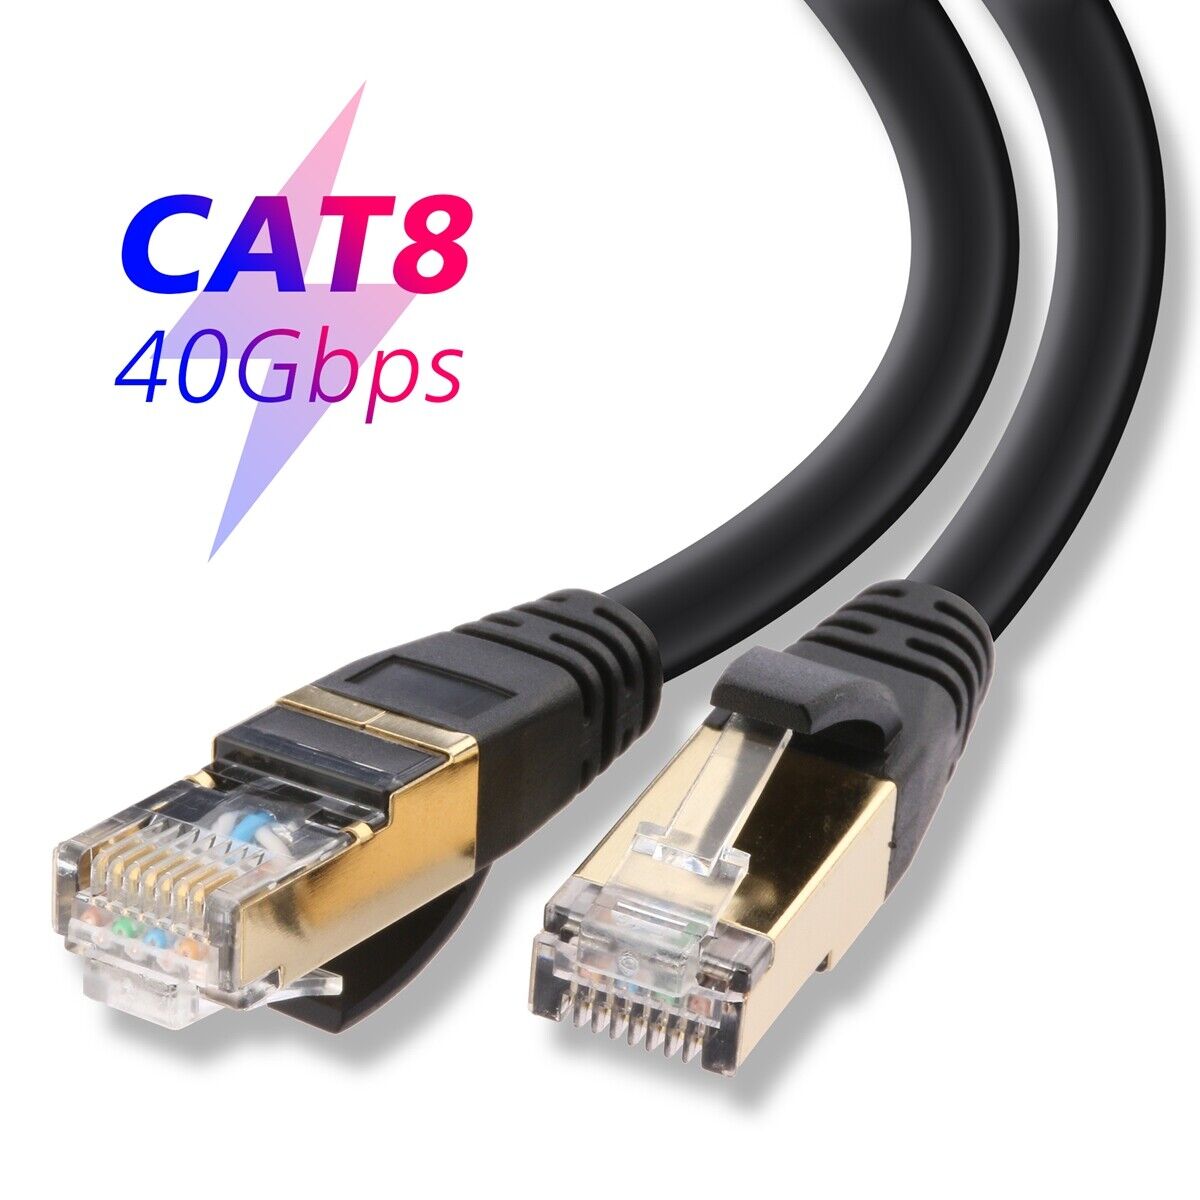 6-100Ft Cat8 Cat7 Cat6 Cable Ethernet Outdoor UltraSpeed with RJ45 Connector Lot